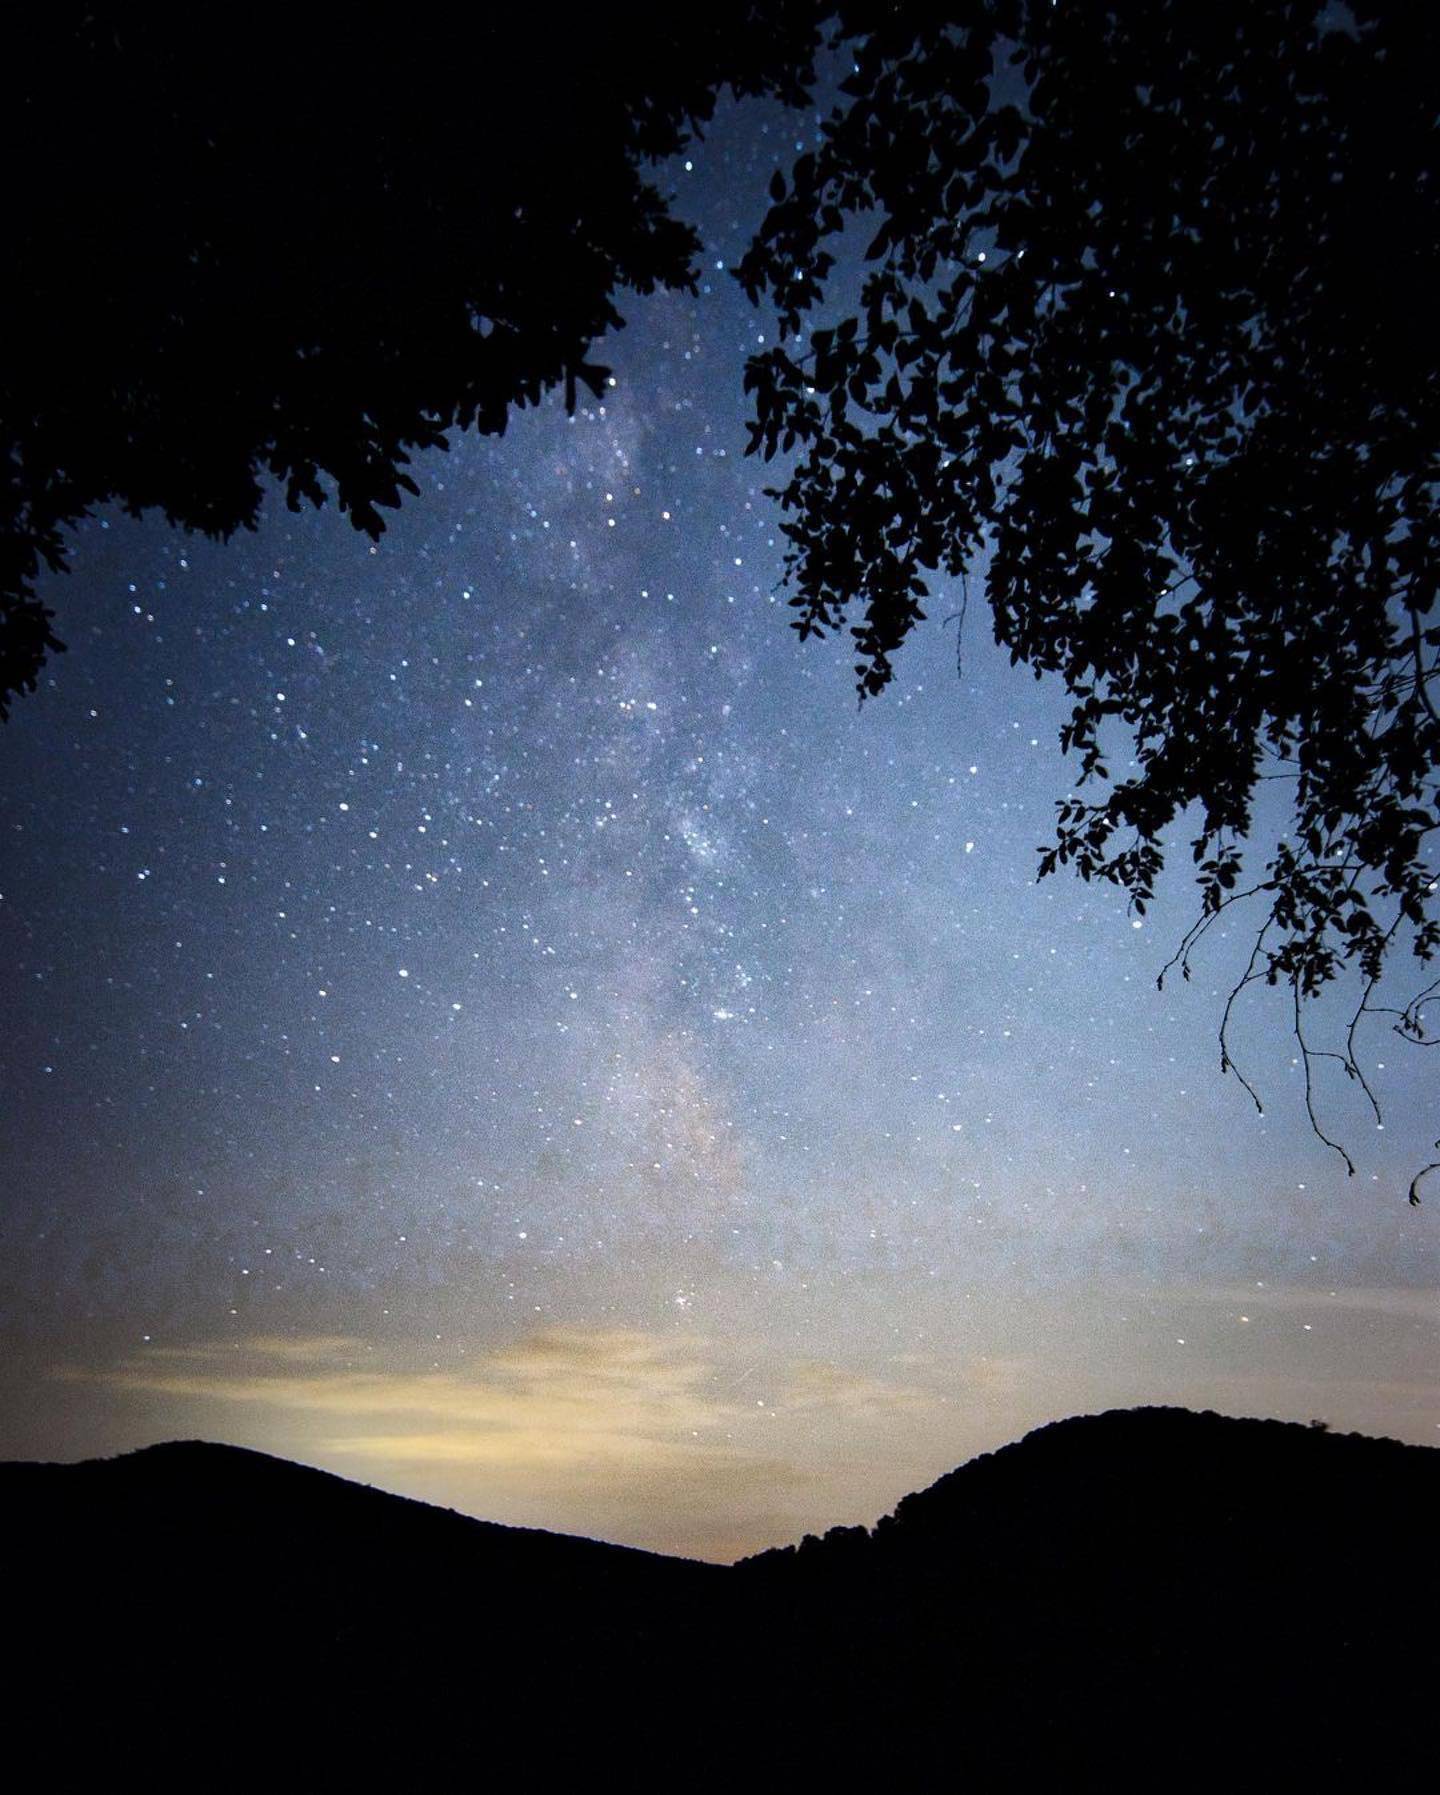 The Milky Way as seen from the Laurel Highlands Hiking Trail in Ohiopyle, Pennsylvania